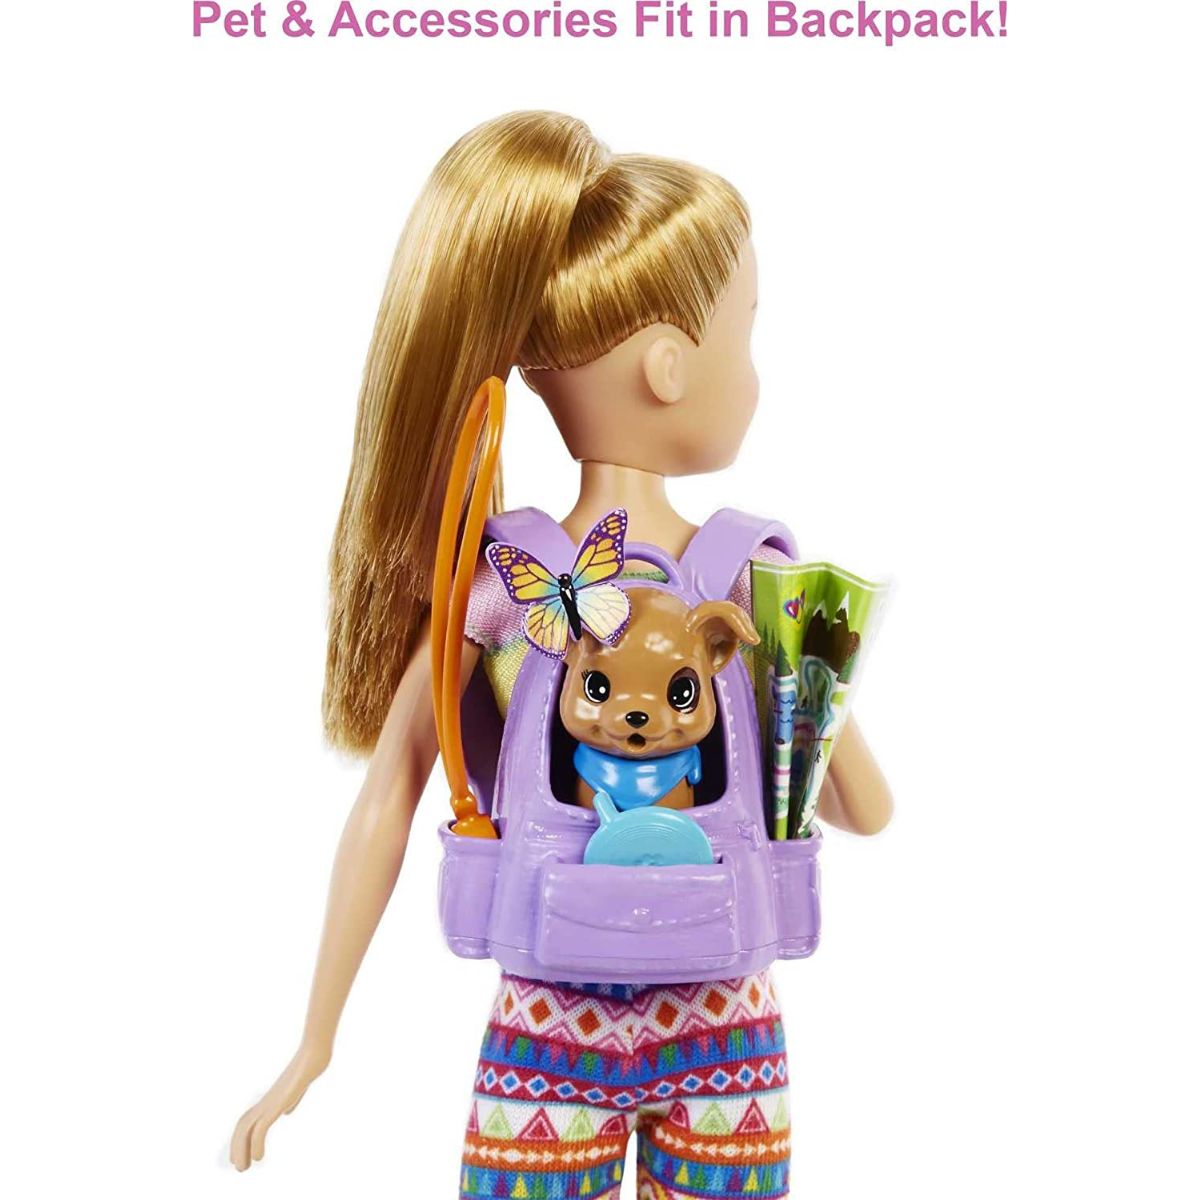  Barbie It Takes Two Doll & Accessories, Playset with